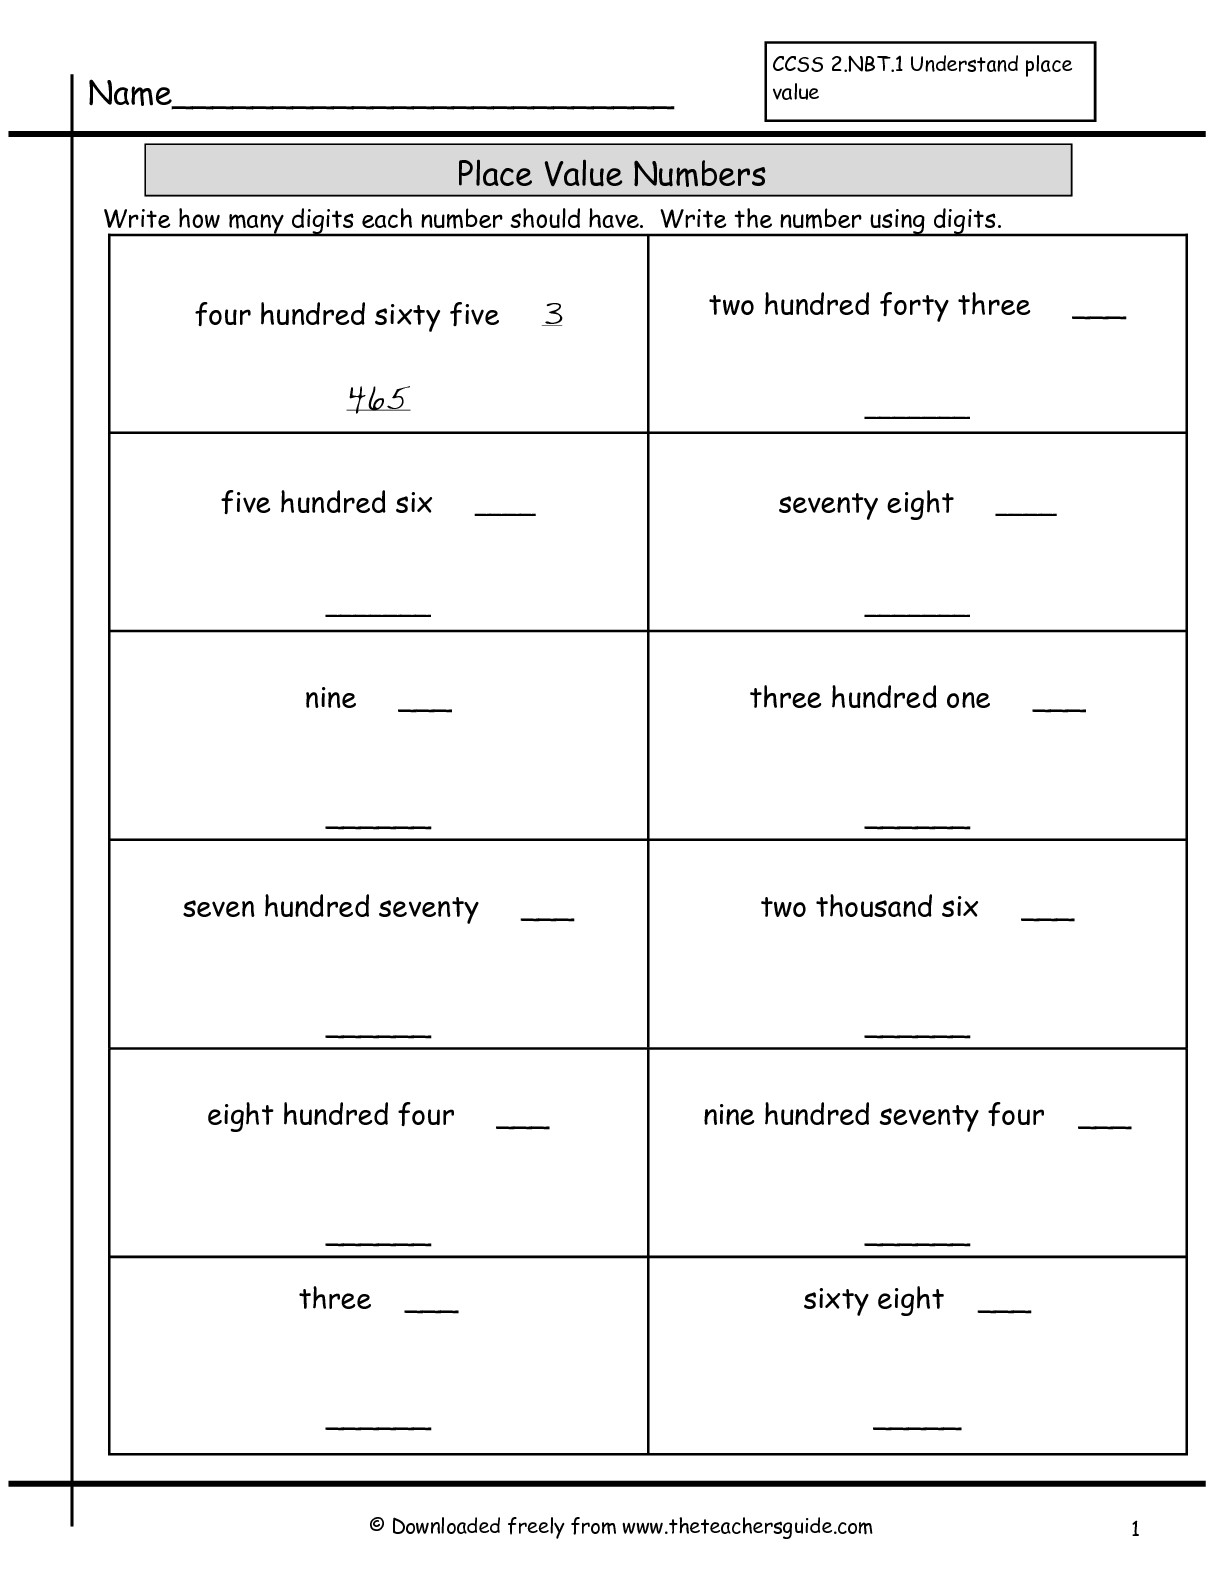 Reading and Writing Numbers Worksheets